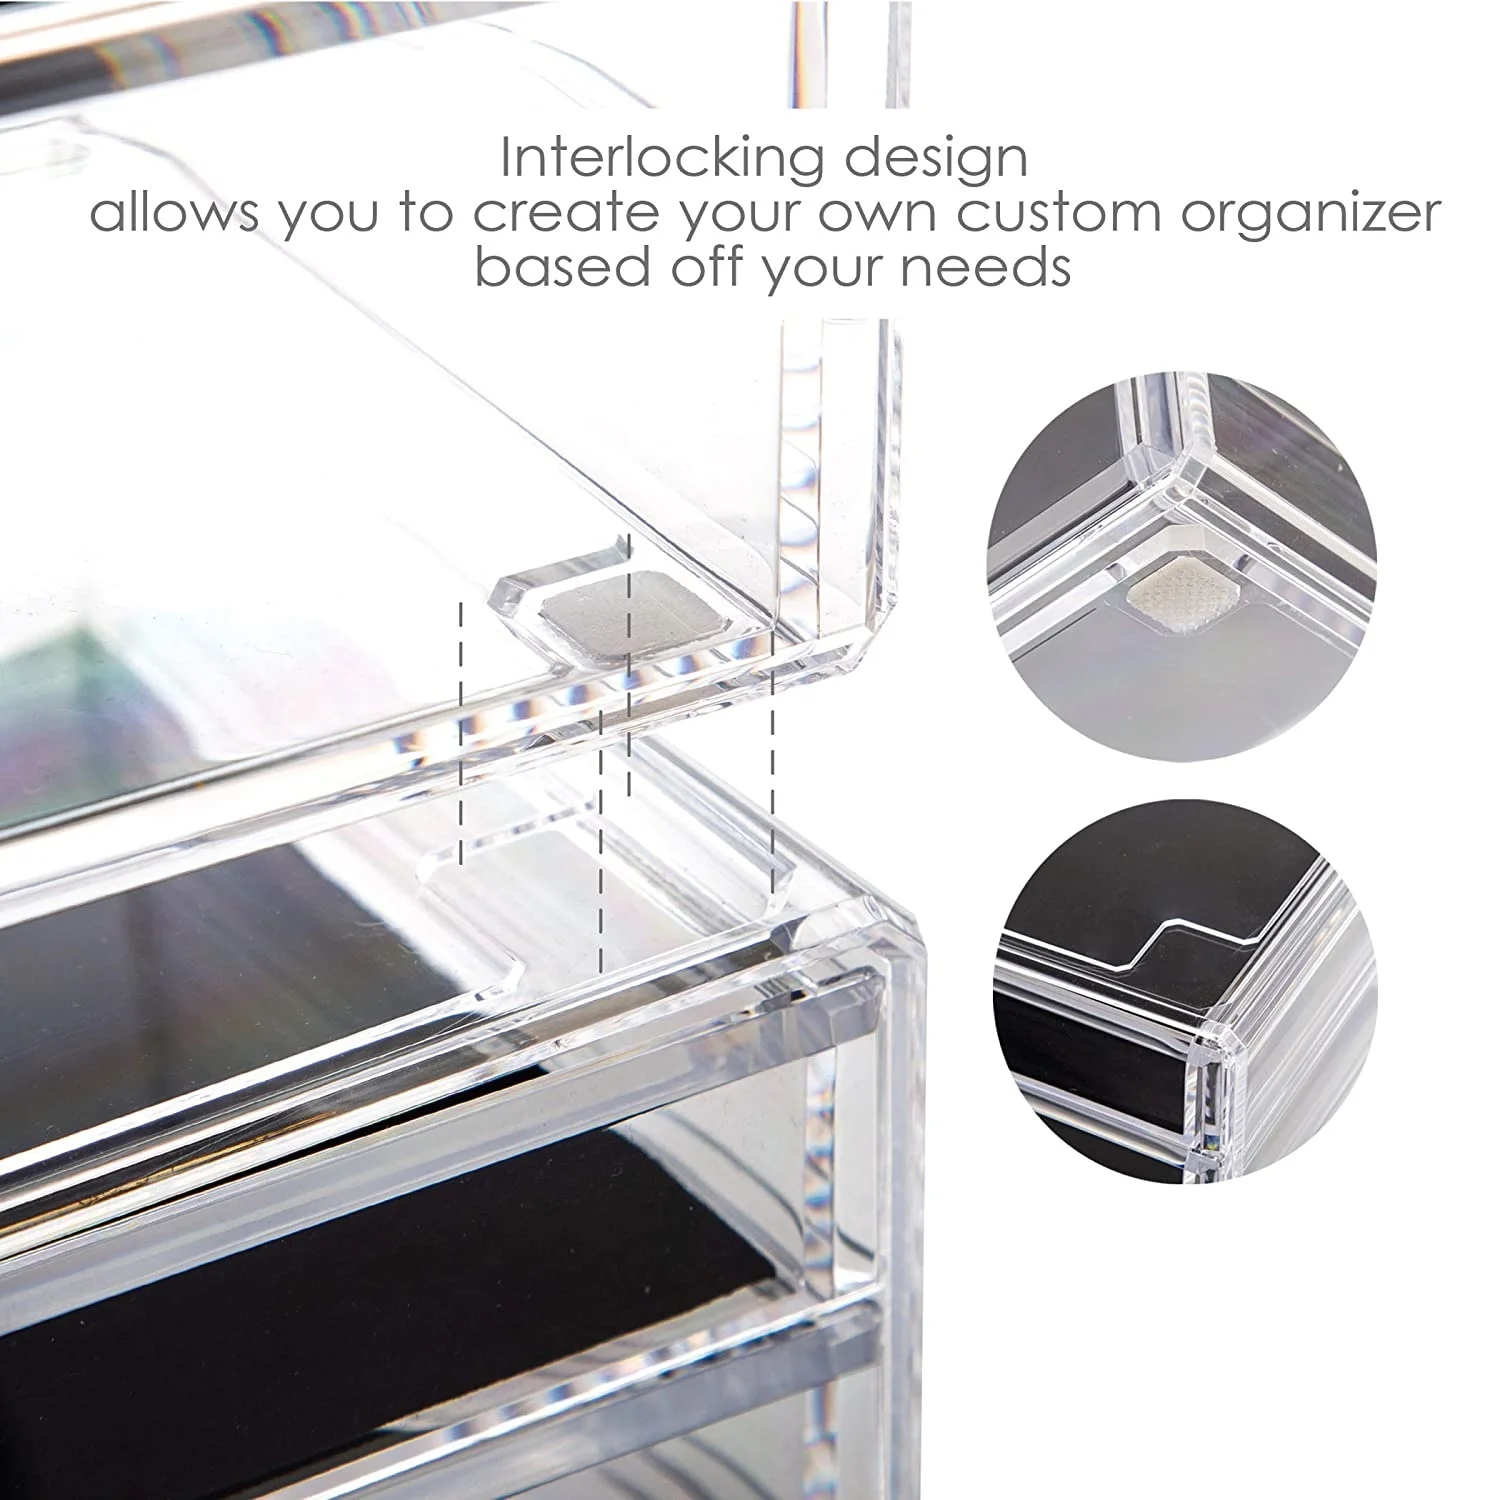 Large Makeup Organizer Acrylic with 5 Drawers Cosmetic Organizer Stackable Jewelry Storage Box Desktop Display Vanity Case Clear